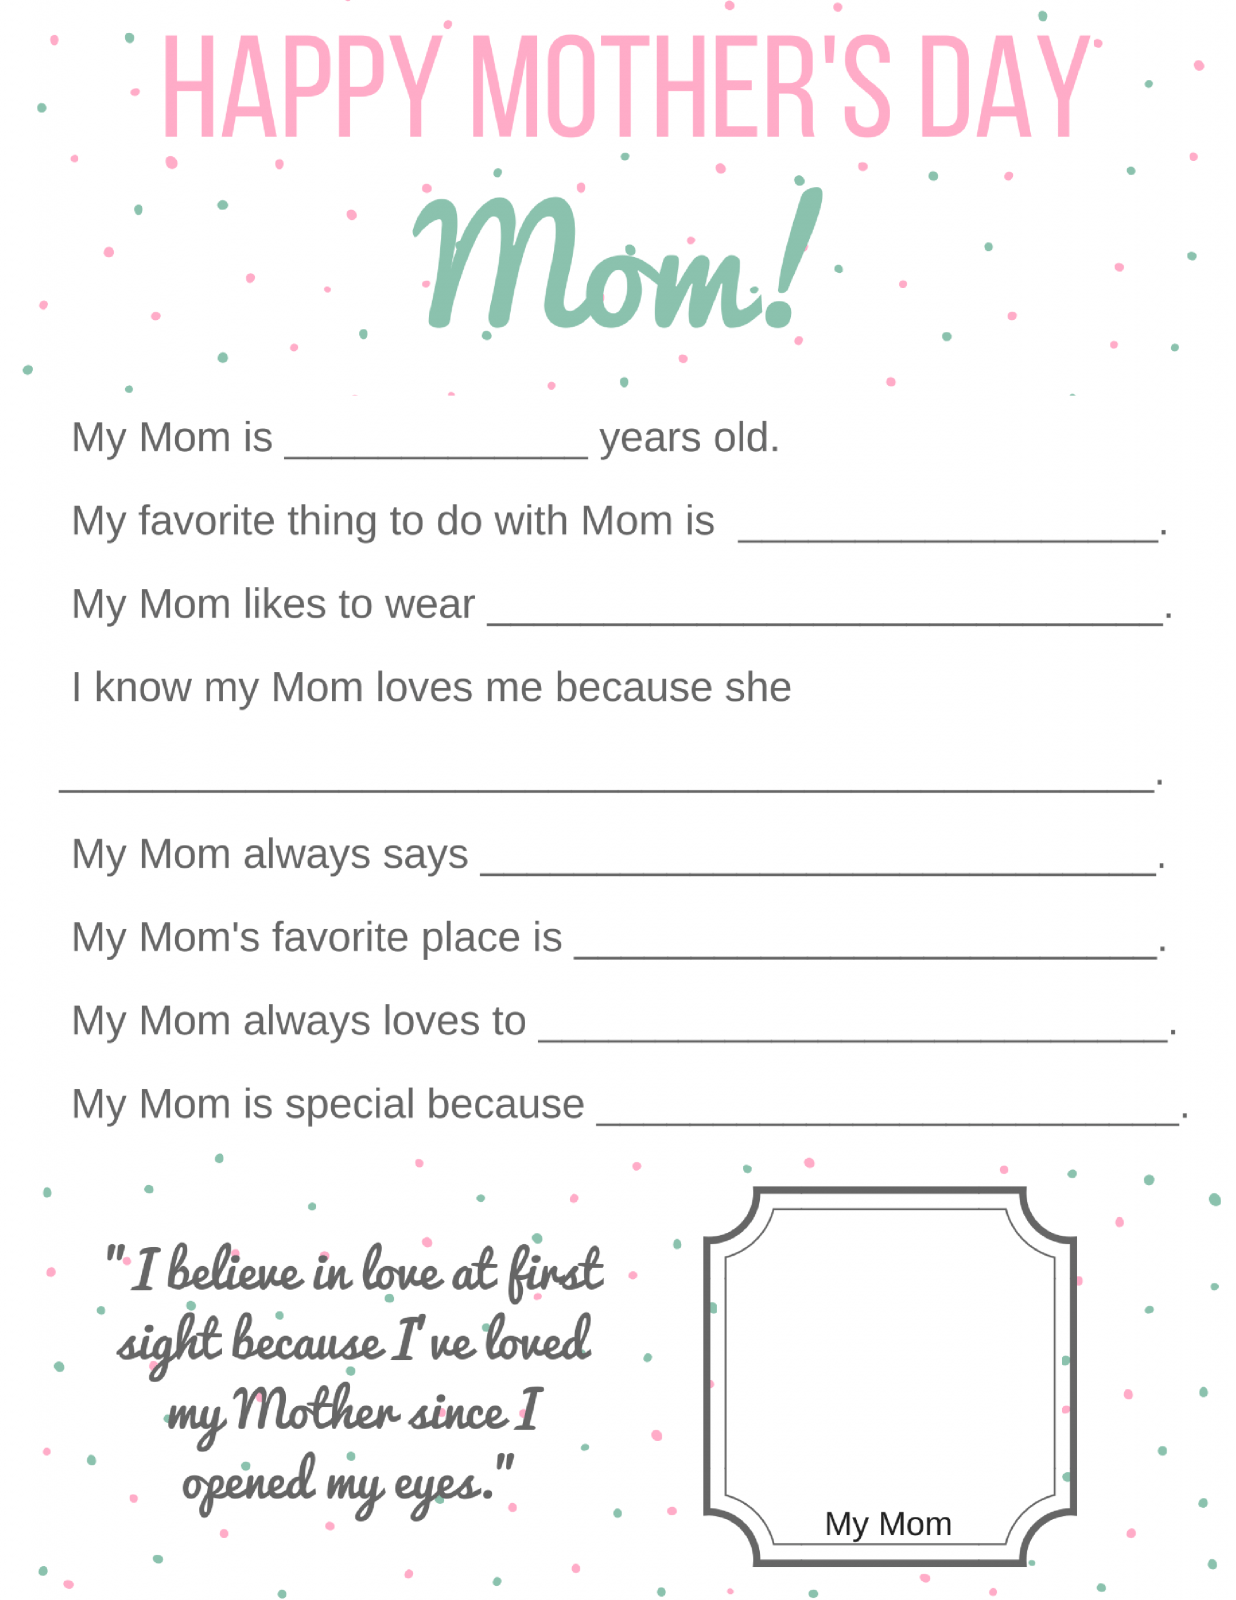 Mother's Day Cards to Make With the Kids - Real Mom Recs